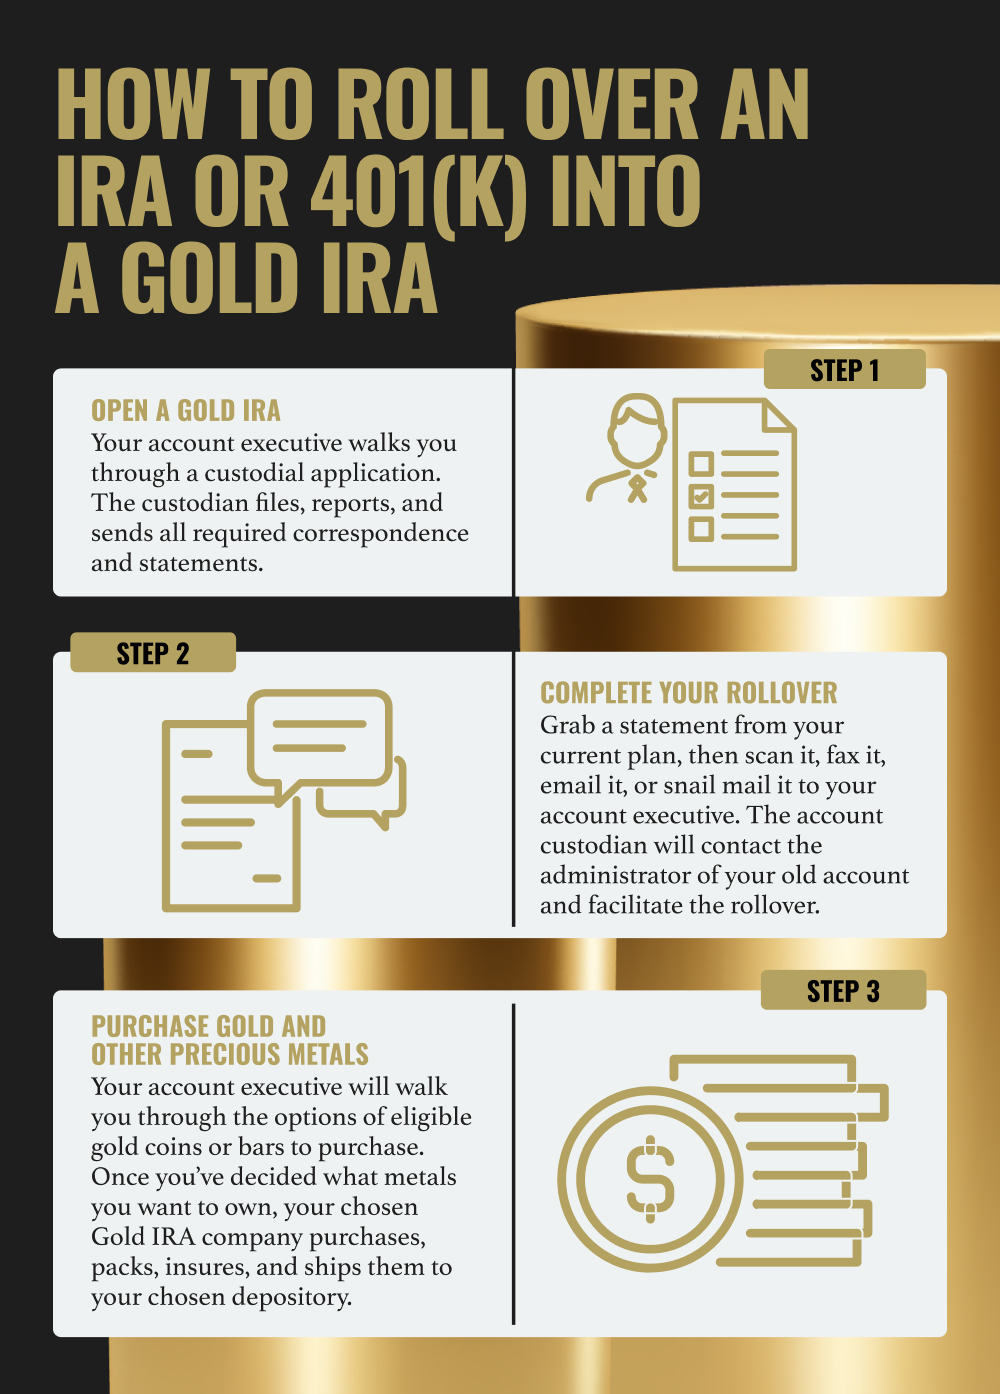 How to roll over an IRA or 401(k) into a gold IRA. Step 1: Open a gold IRA. Step 2: Complete your rollover. Step 3: Purchase gold and other precious metals.